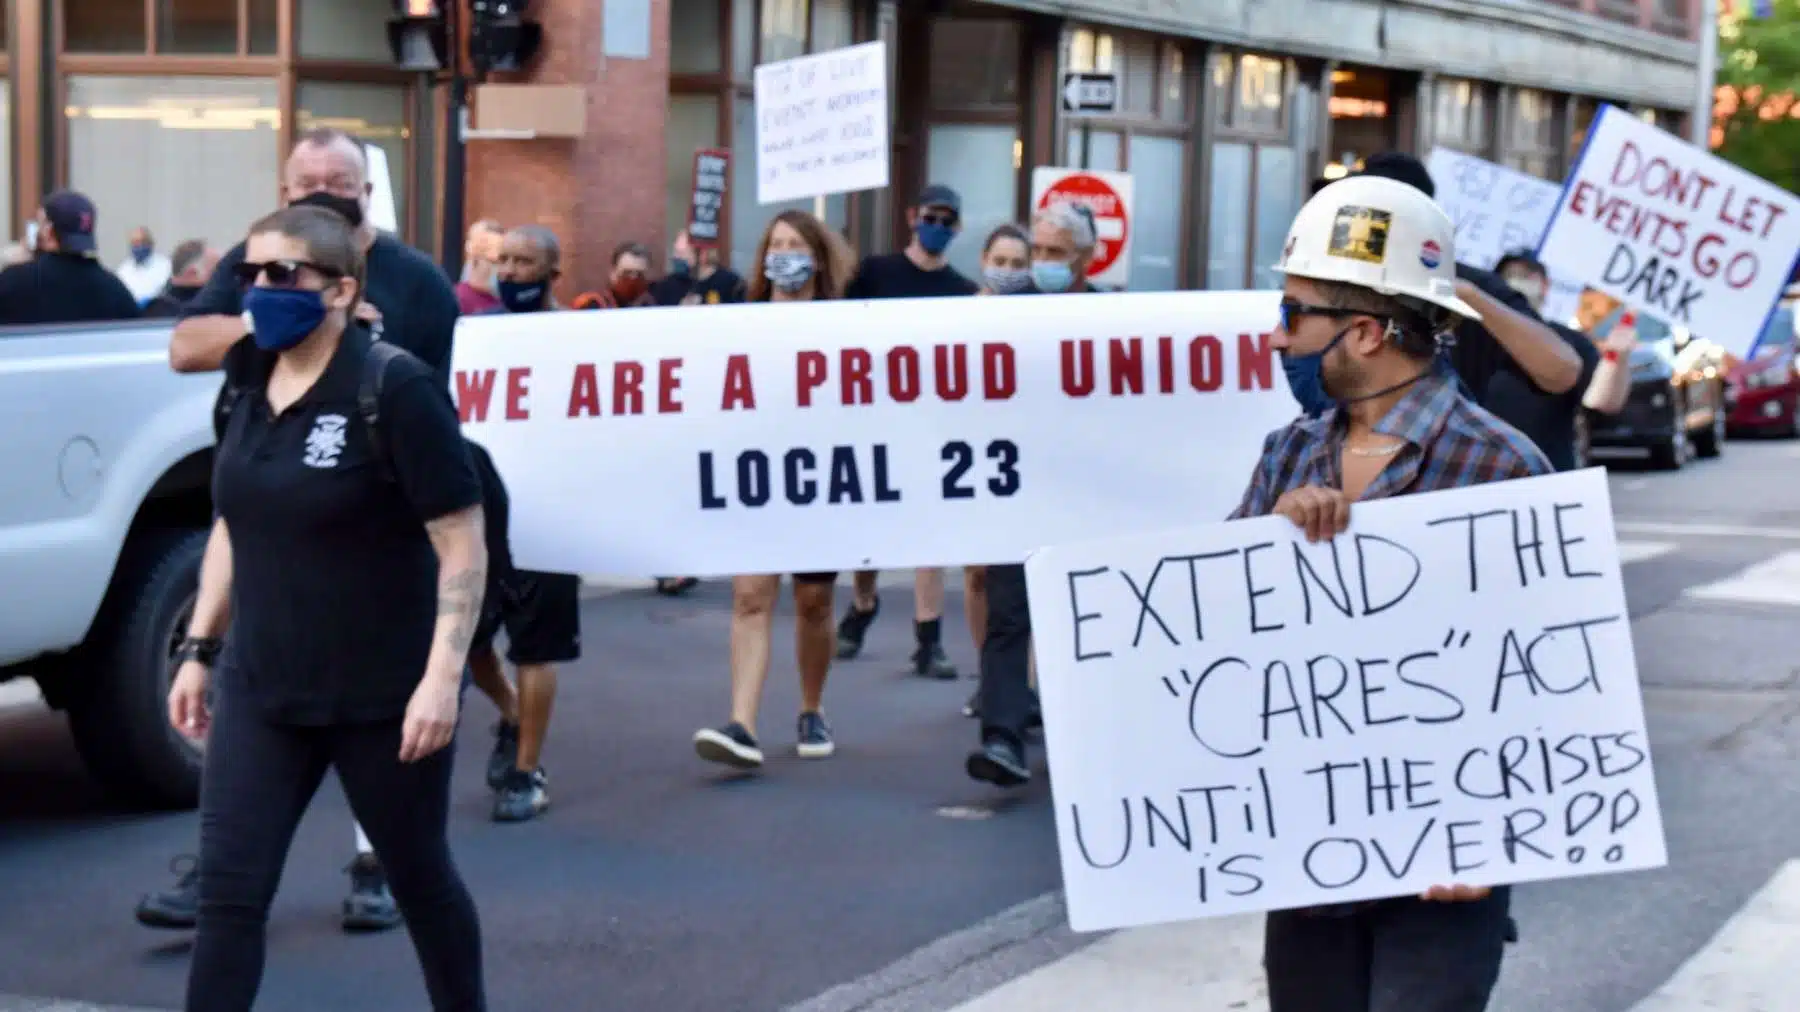 Rhode Island News: IATSE marches across Providence to draw attention to the plight of theater workers